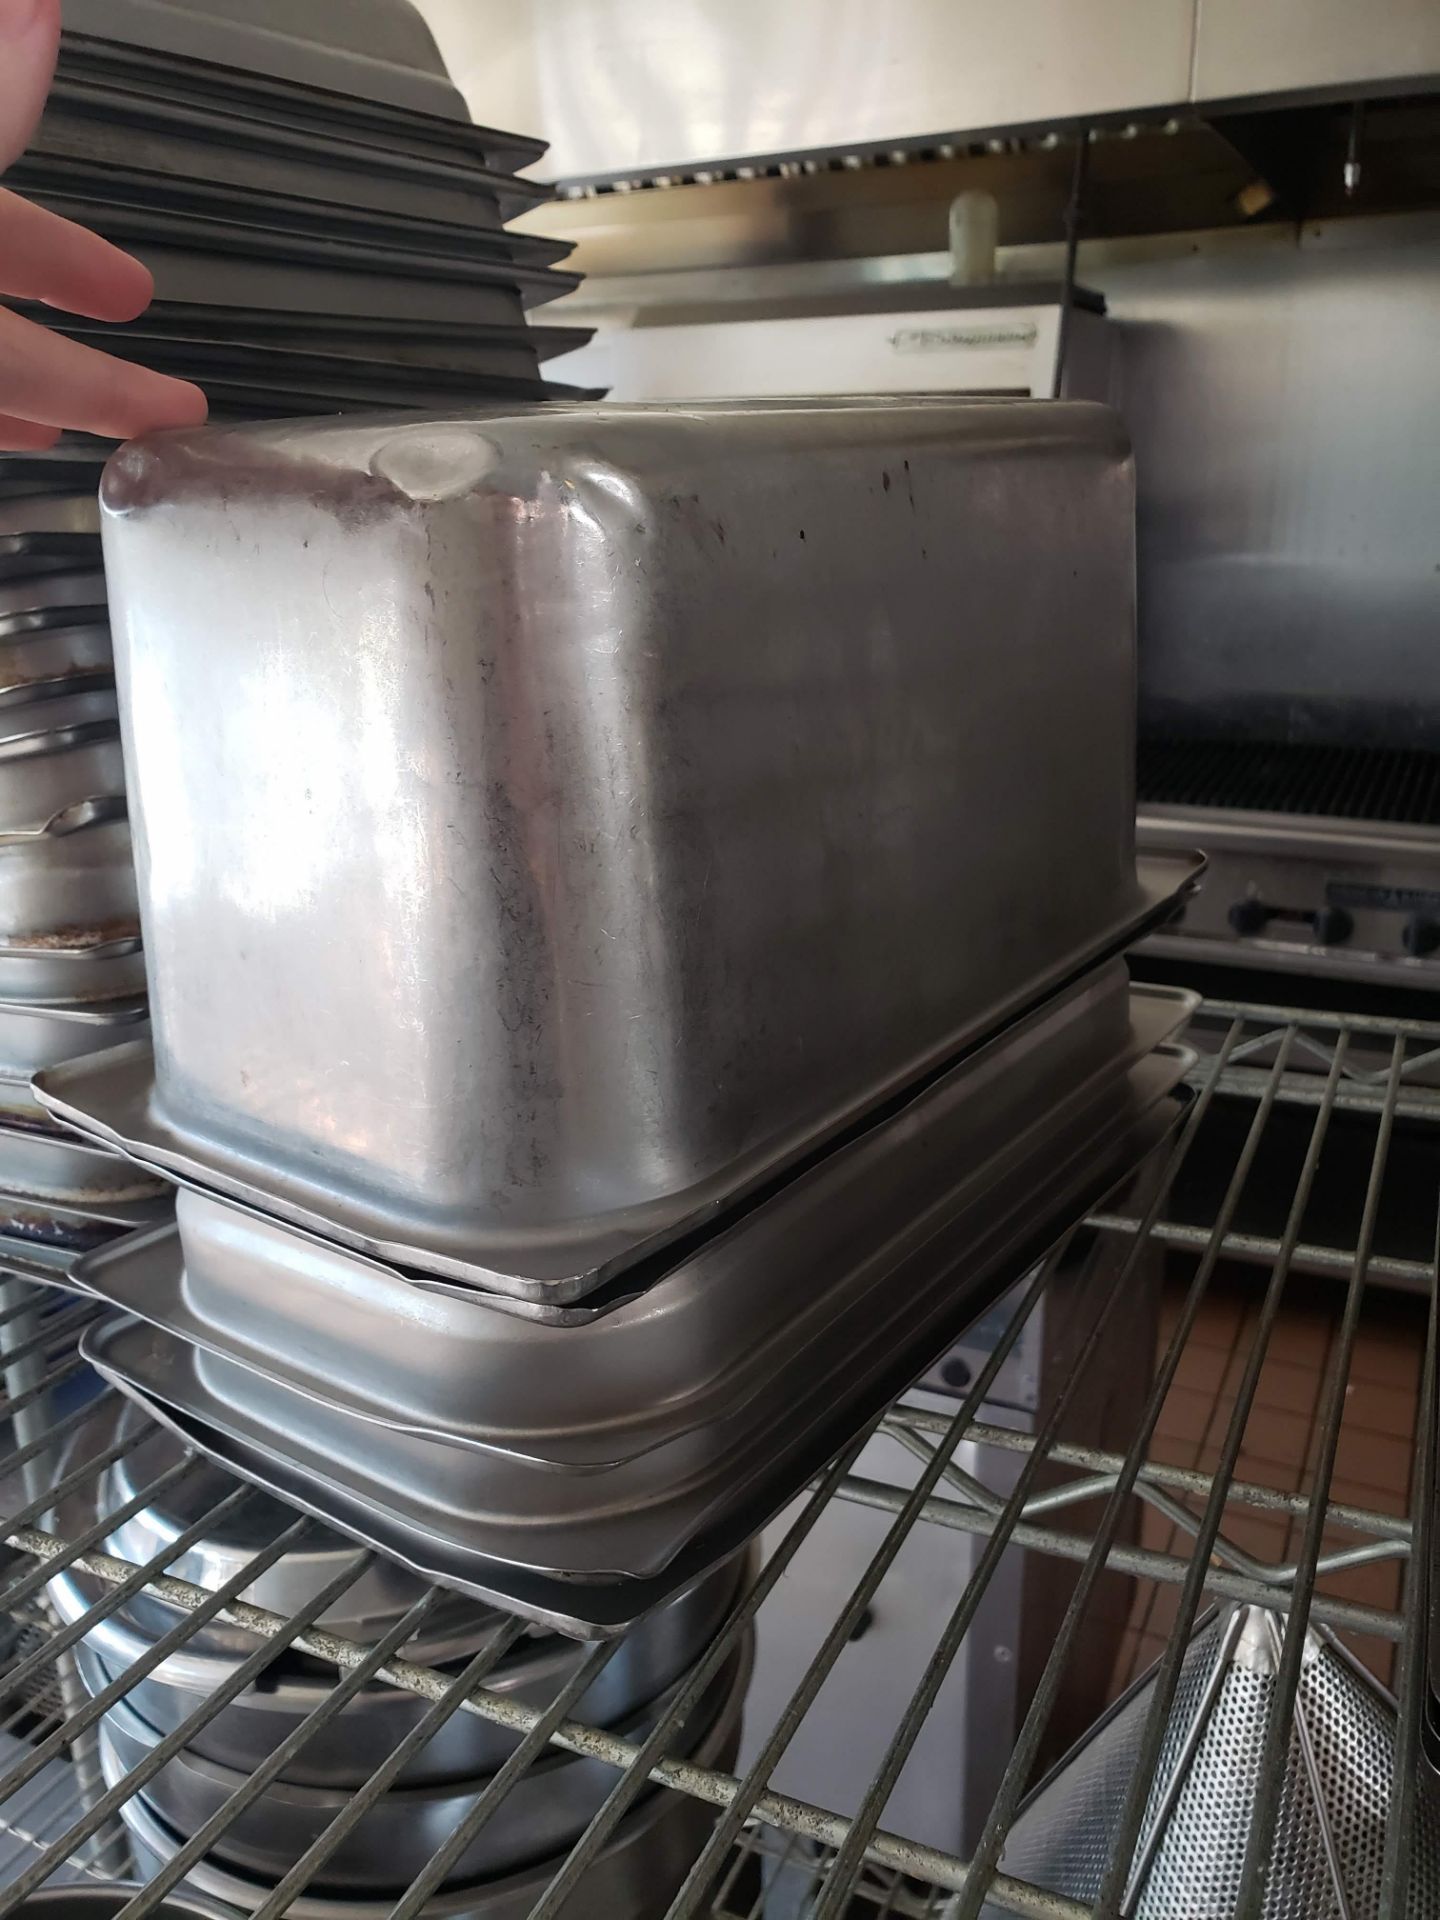 LOT OF ADCRAFT 22T6 1/3 STAINLESS STEEL INSERT PANS - Image 3 of 3